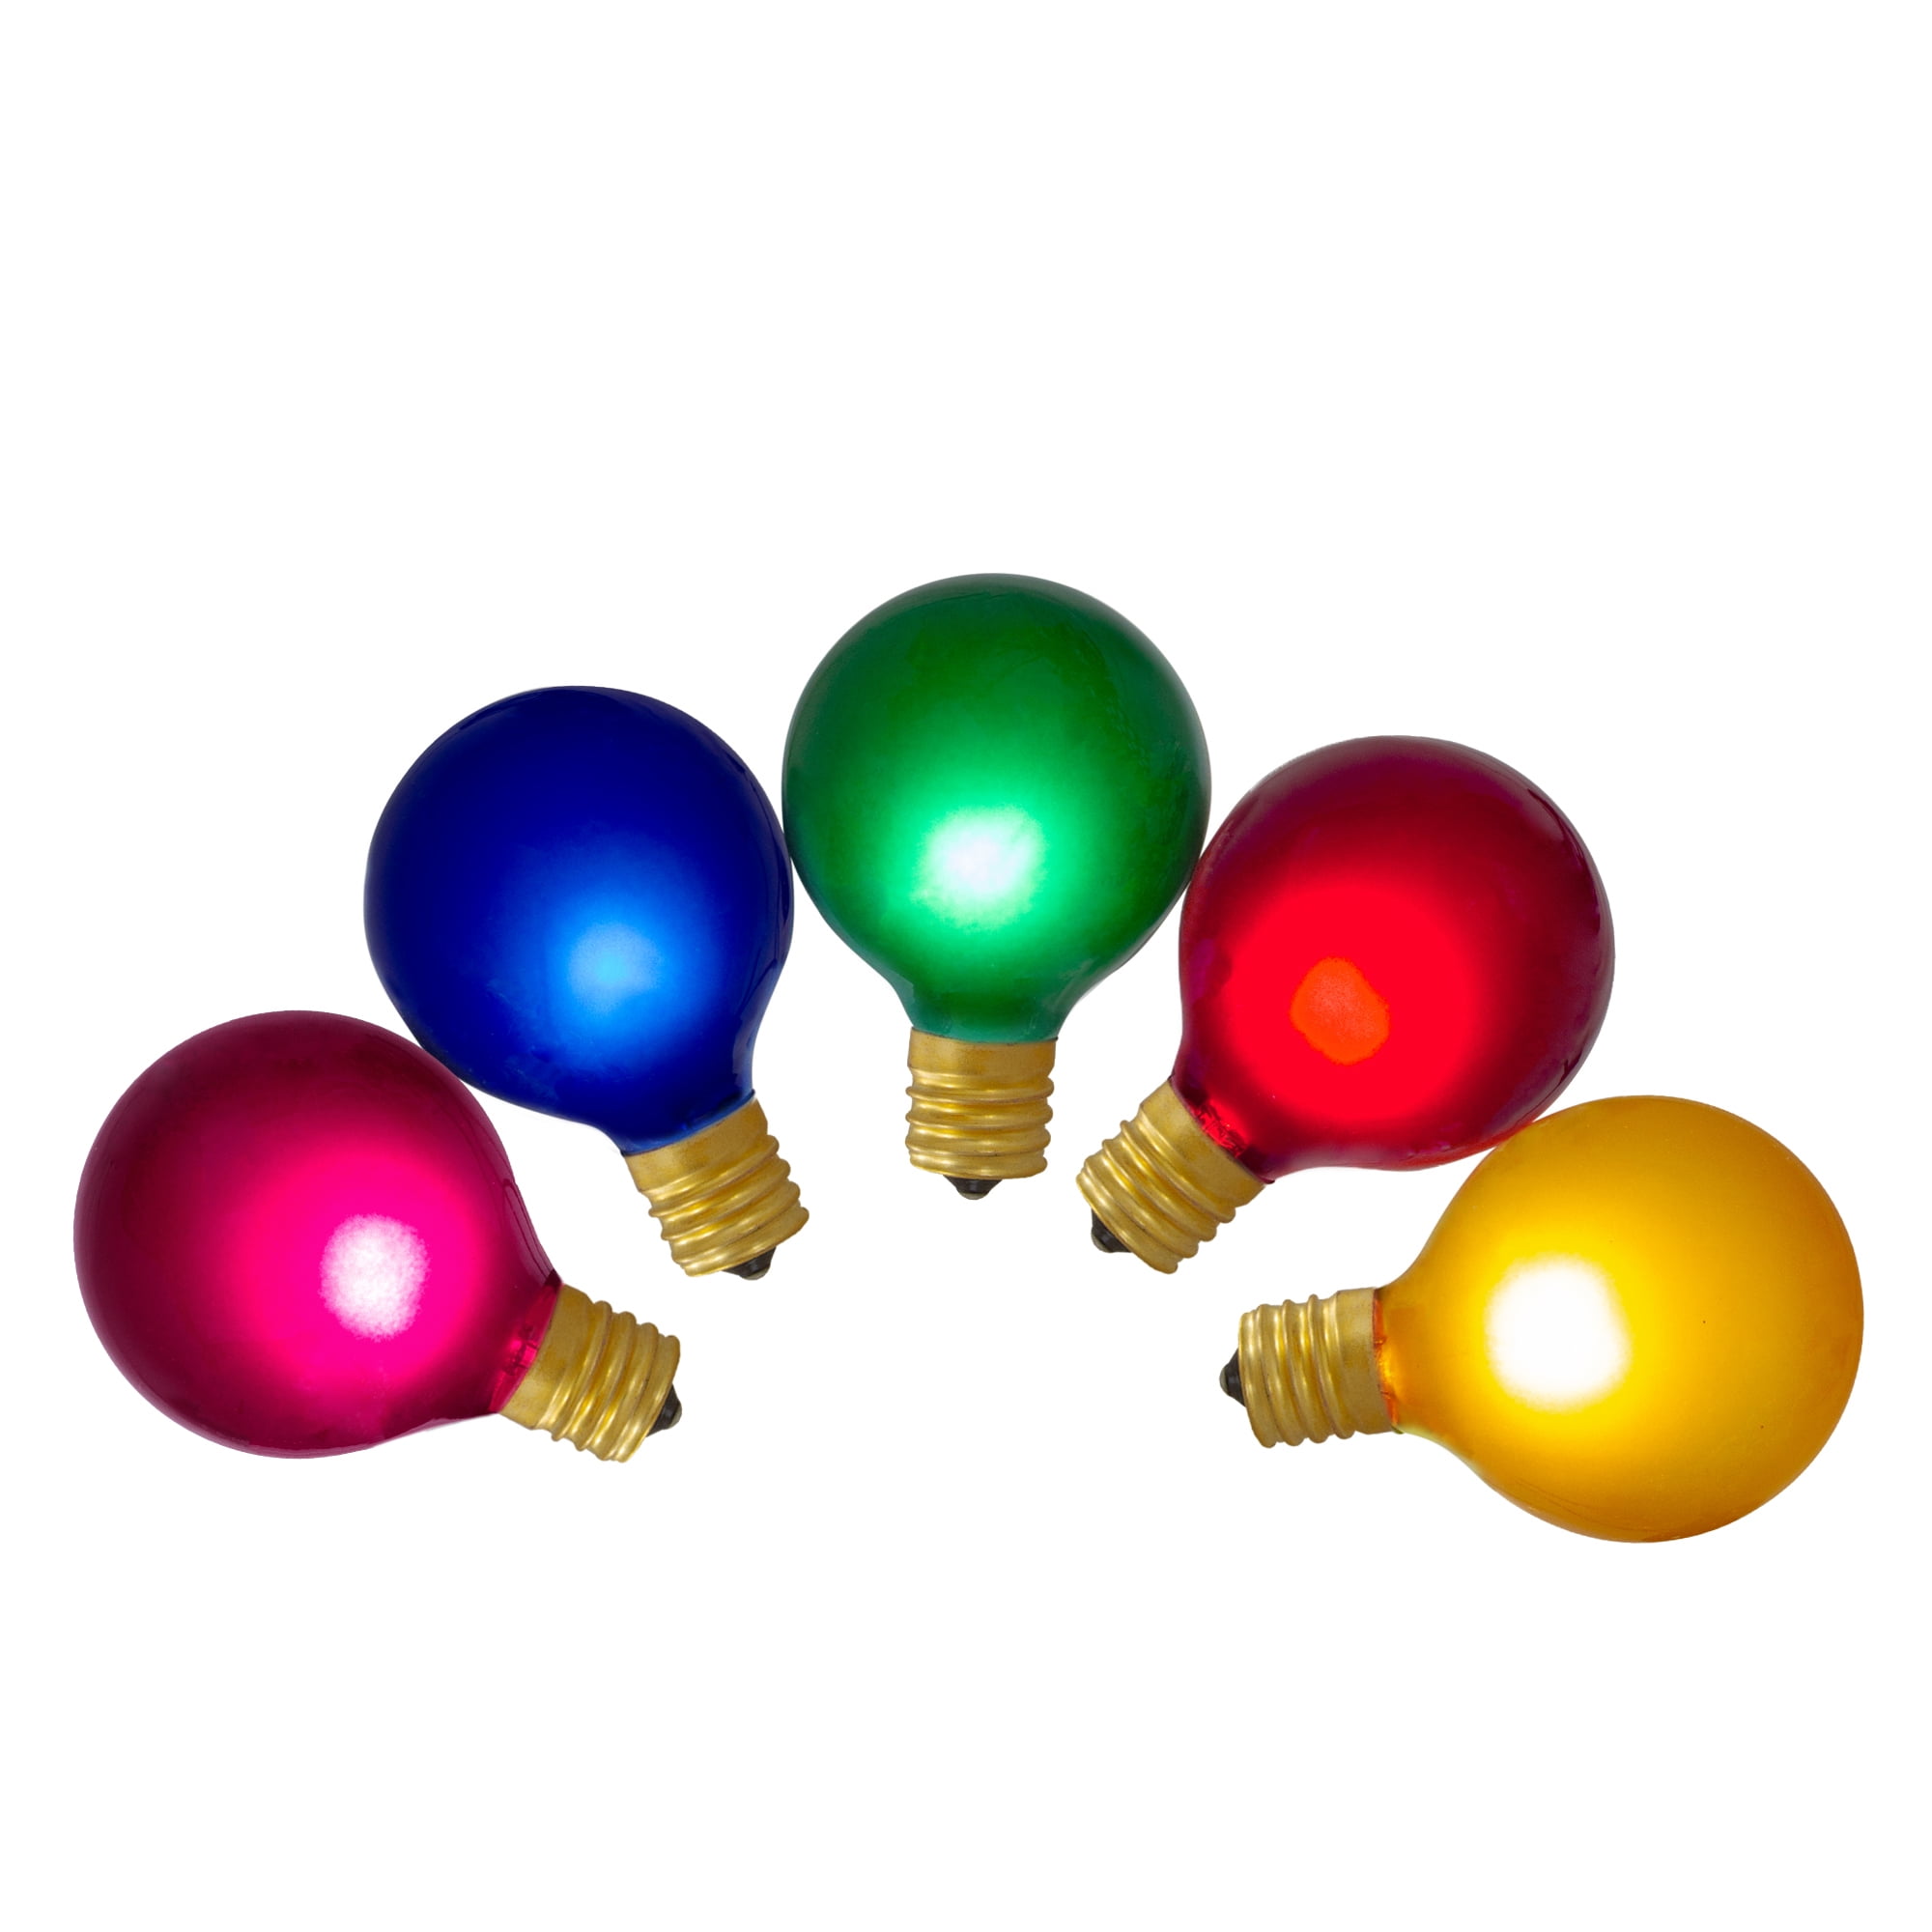 200 Multi Color Round Faceted Light Bulb replacements for Ceramic Christmas Tree 